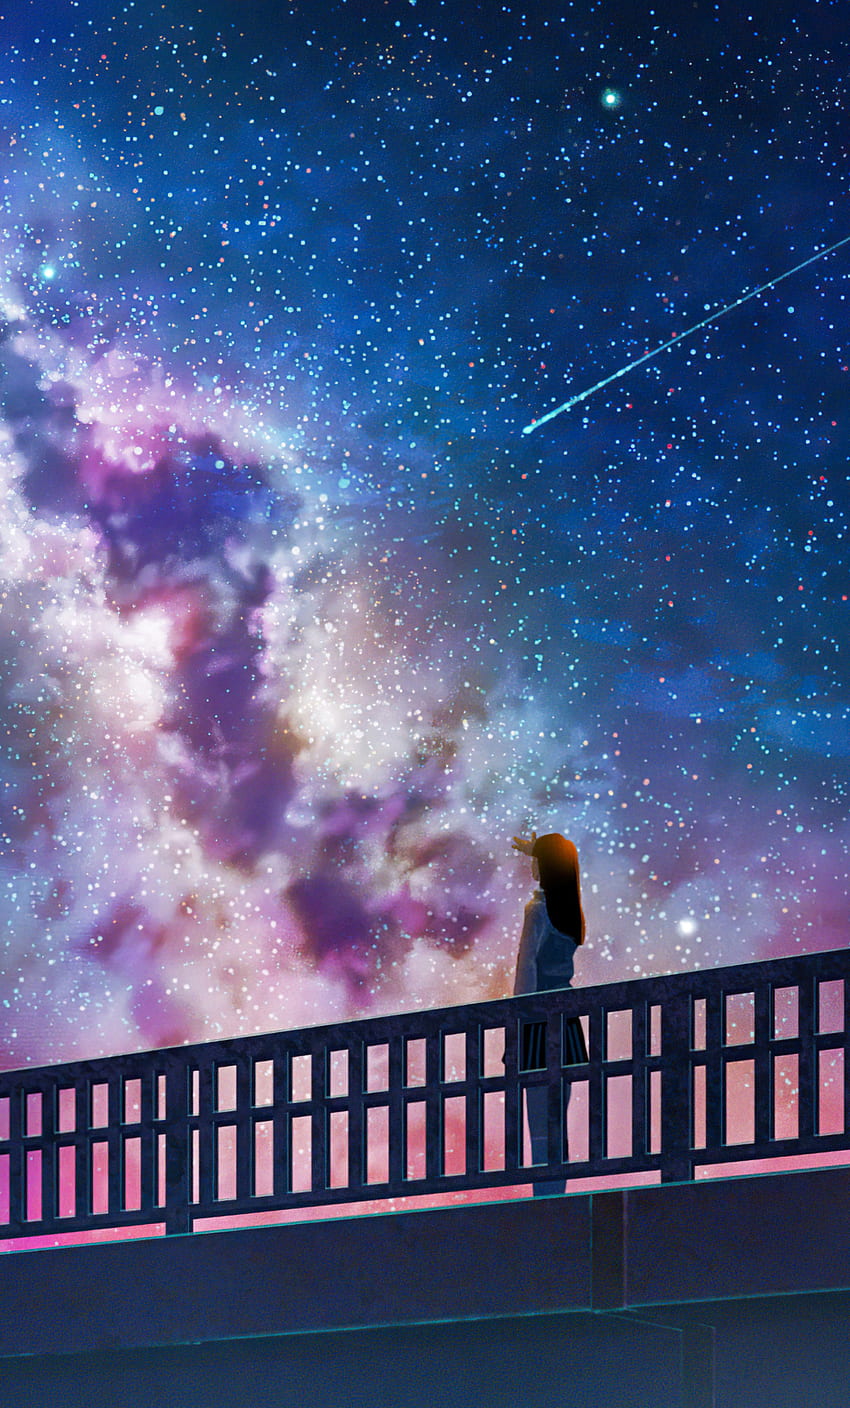 Wallpaper : city, night, anime, galaxy, sky, clouds, Moon, moonlight,  atmosphere, universe, astronomy, Aurora, midnight, star, darkness,  screenshot, outer space, astronomical object 1920x1080 - aosama - 241088 -  HD Wallpapers - WallHere